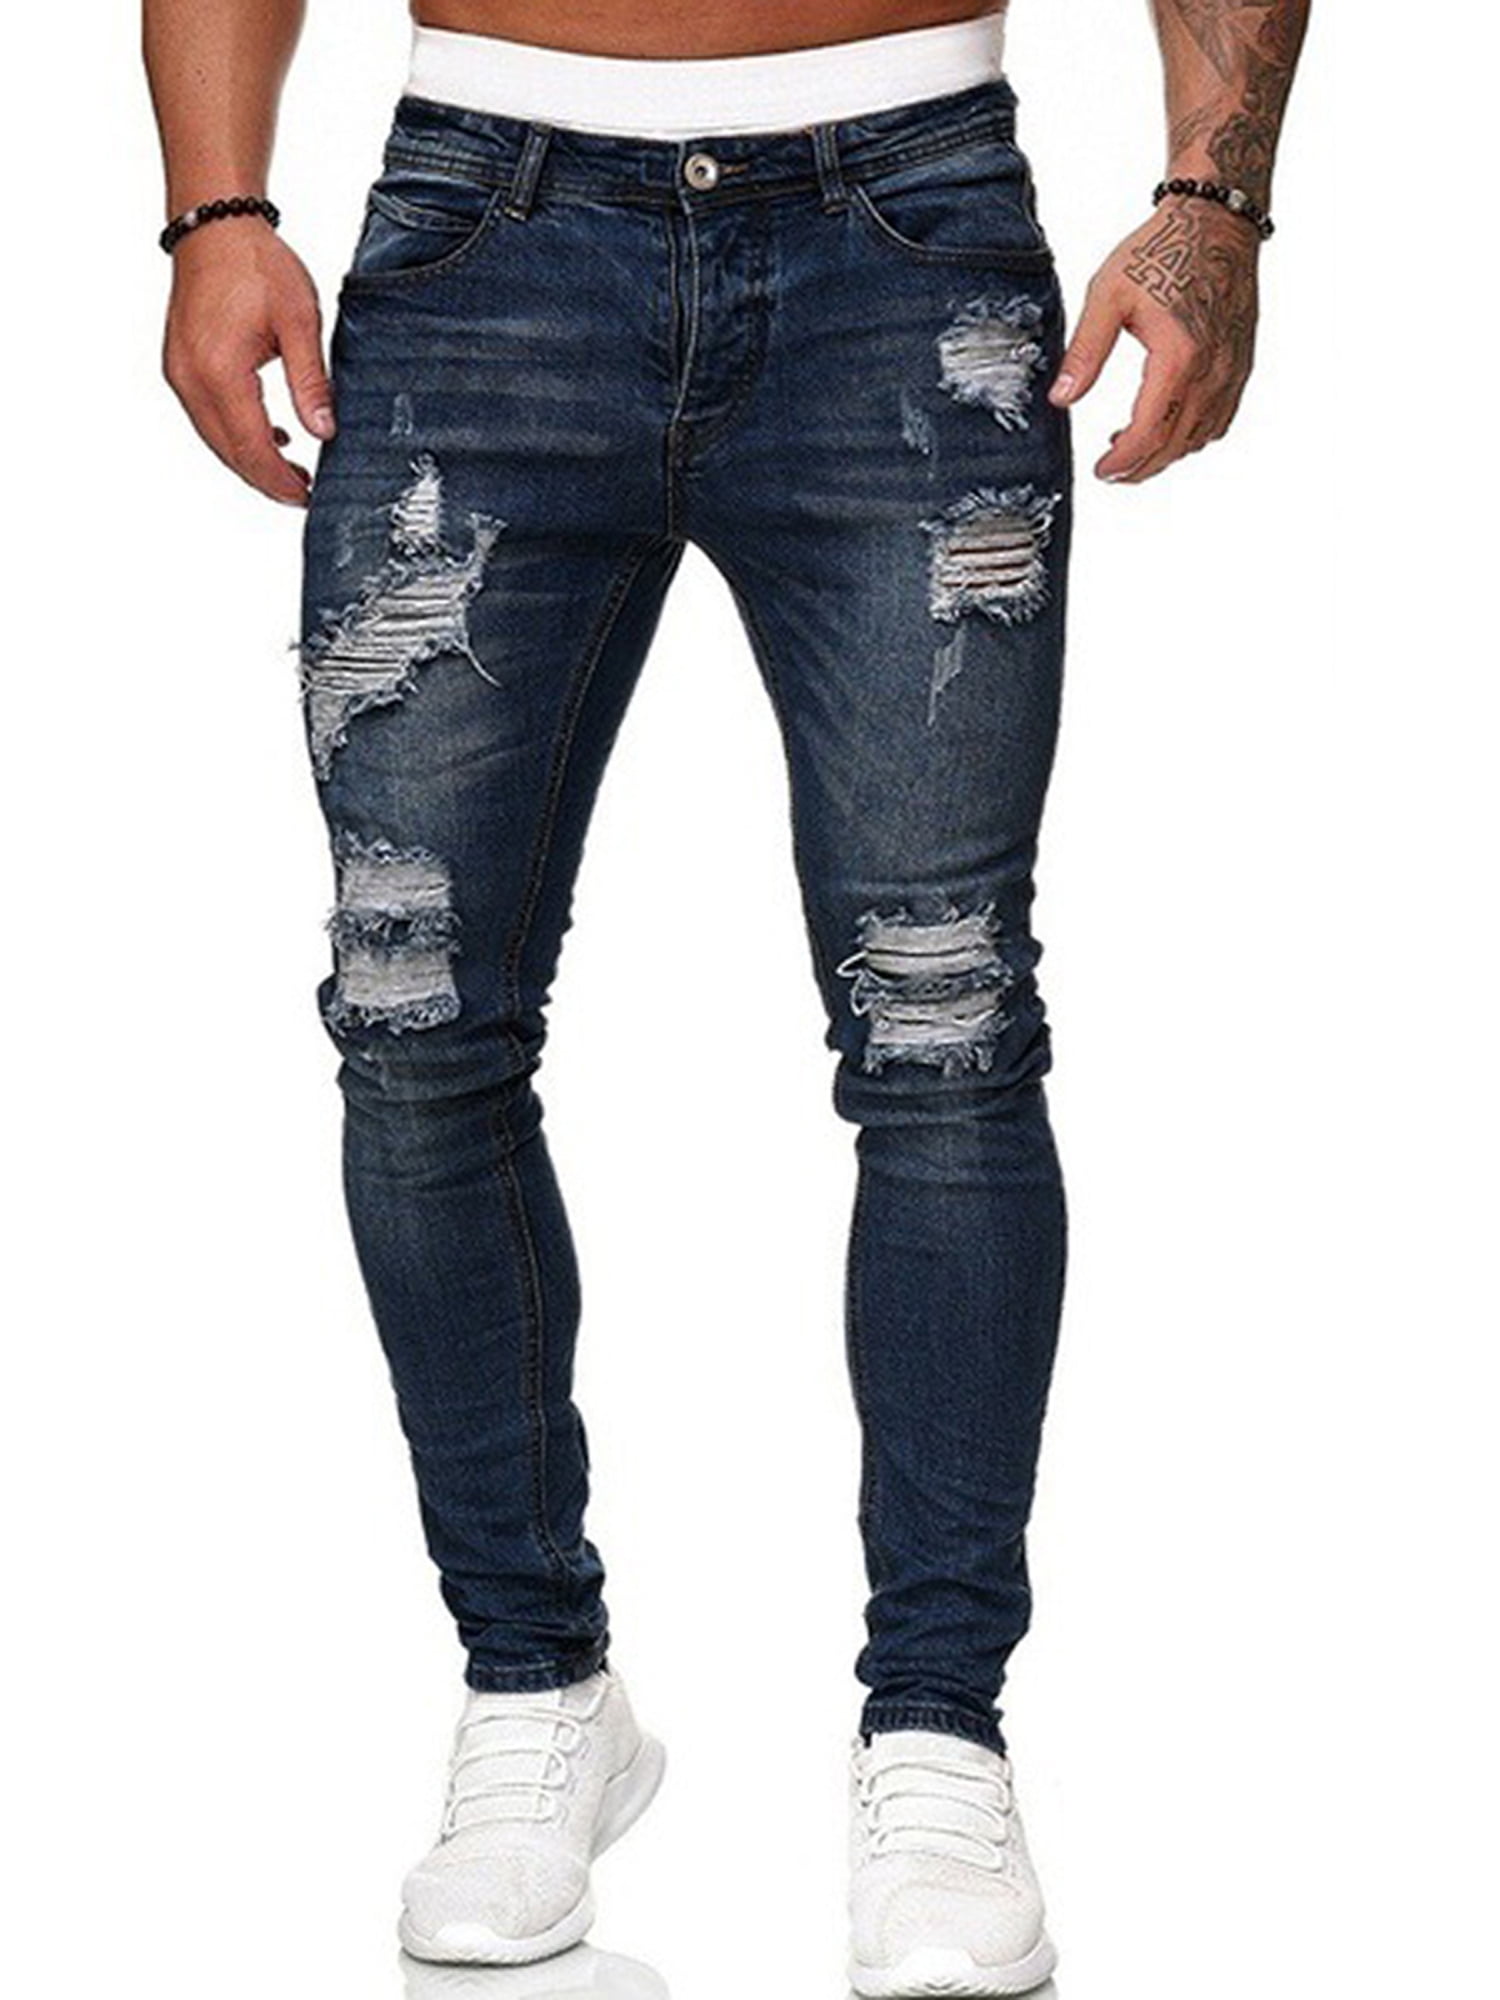 Cambkatl Men's Ripped Jeans Distressed Destroyed Skinny Slim Fit